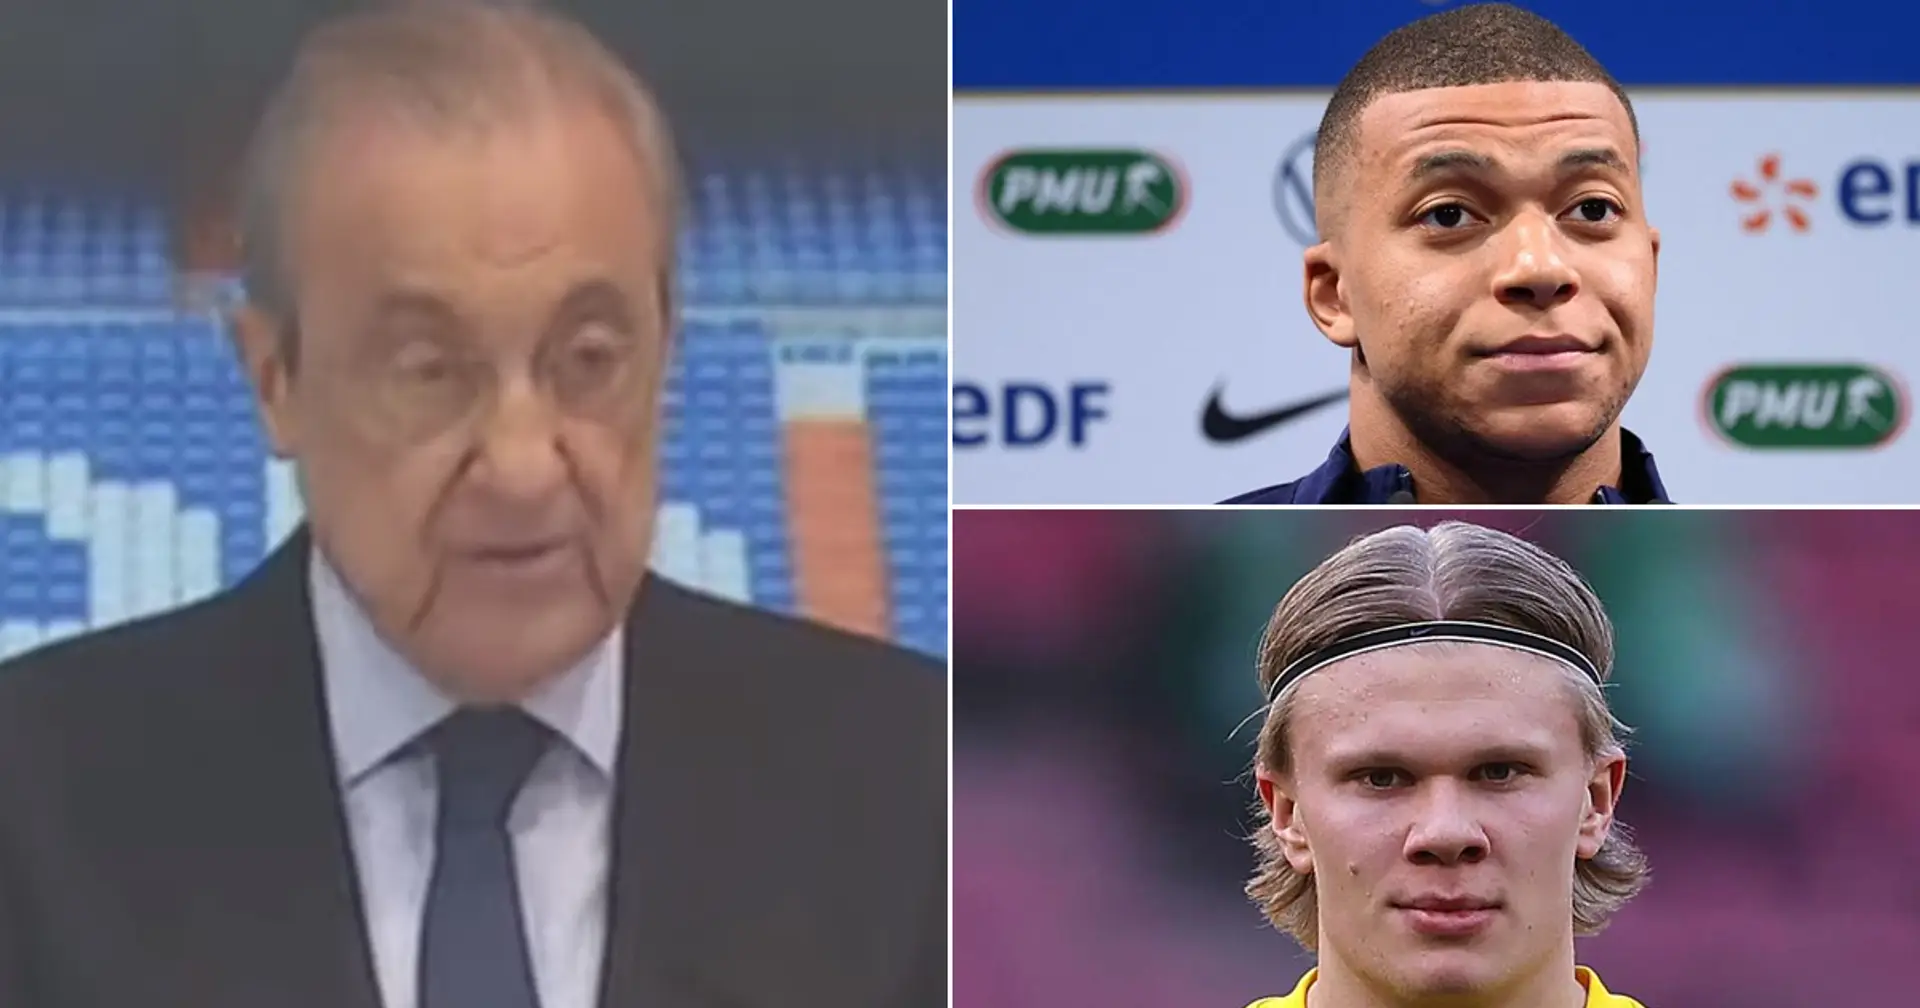 Madrid will try to sign Mbappe or Haaland, other signings ruled out (reliability: 4 stars)